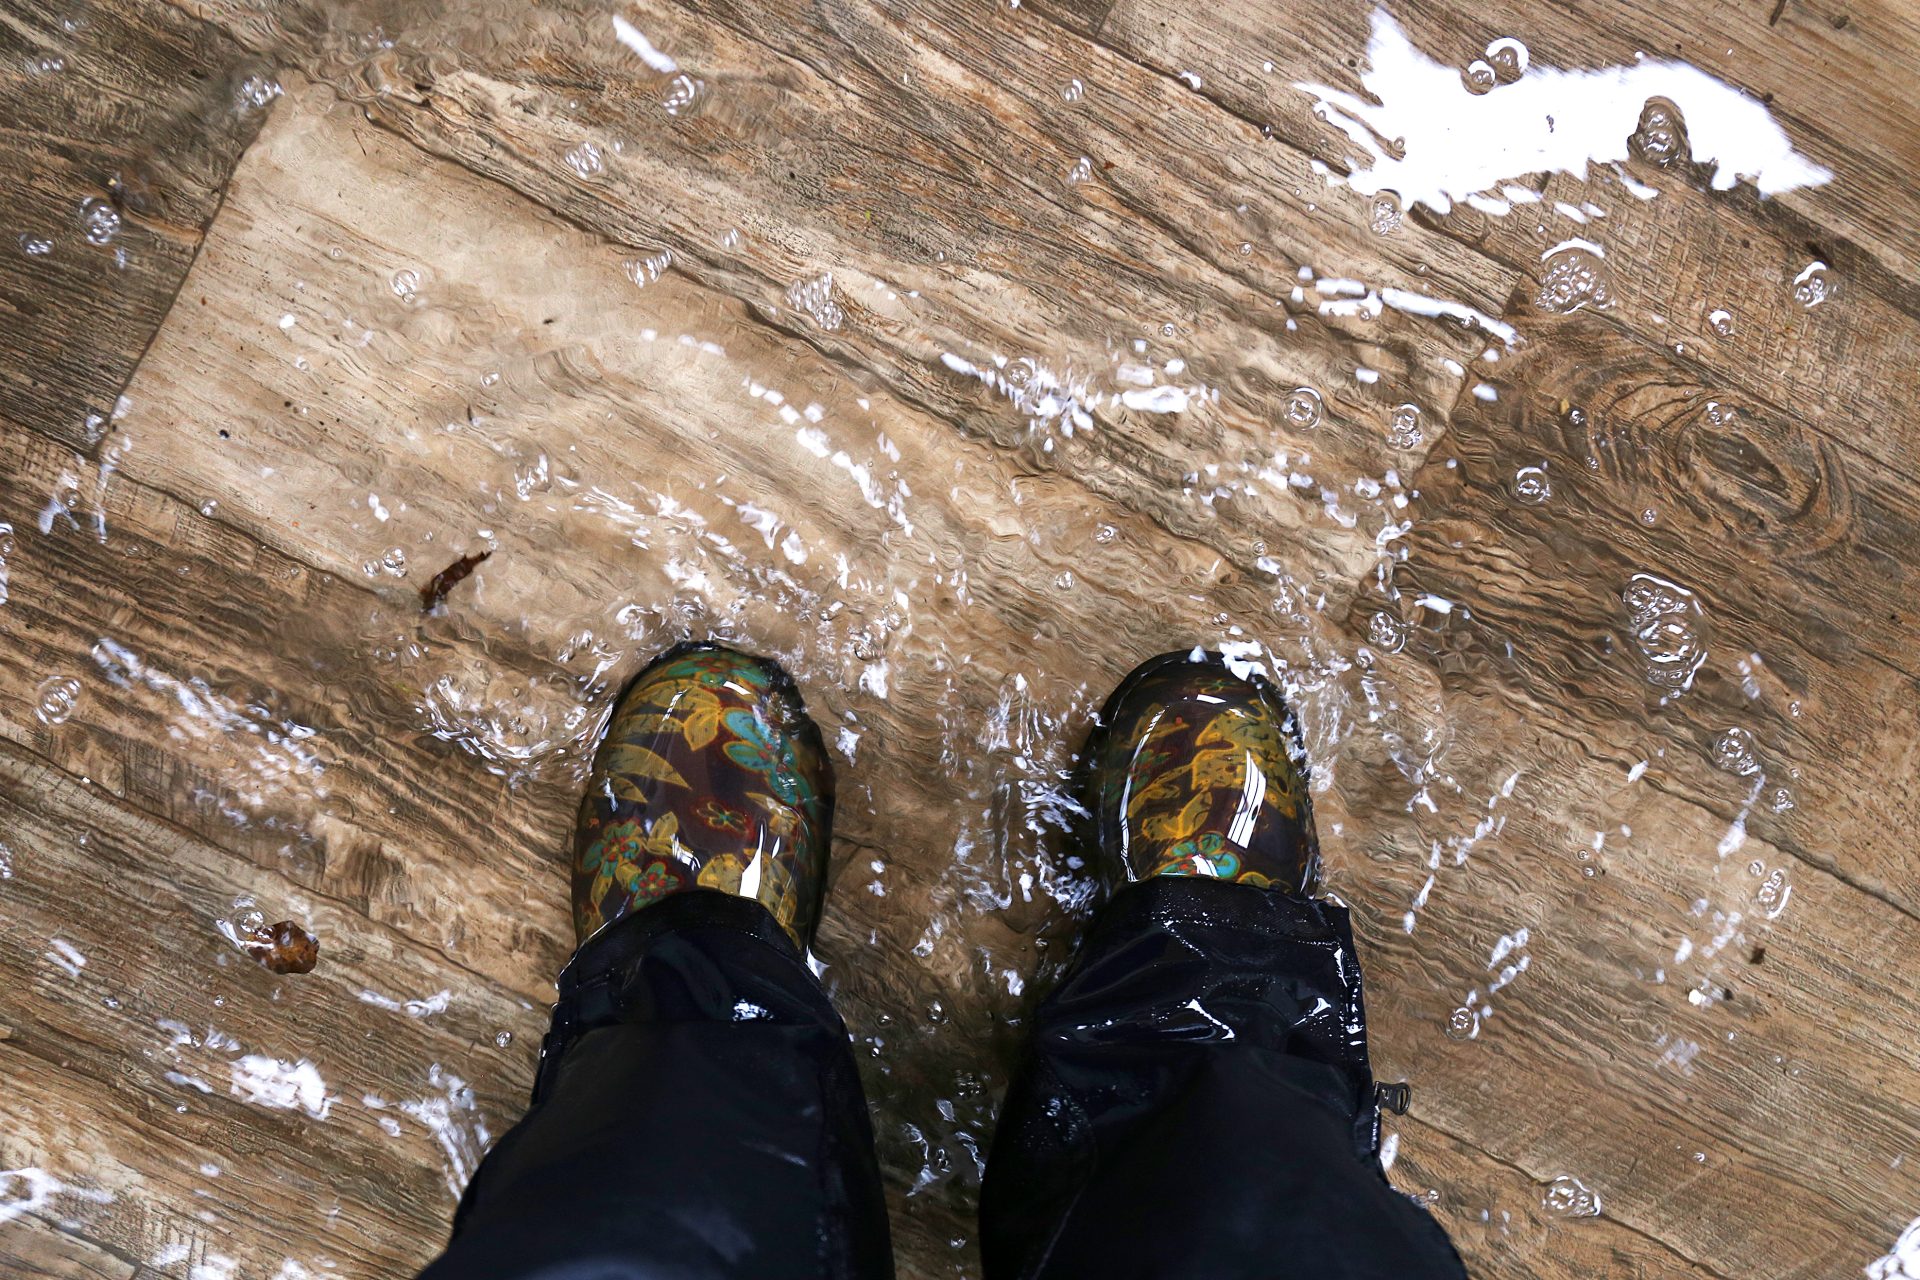 A person standing on a wooden floor in a pair of rain boots.